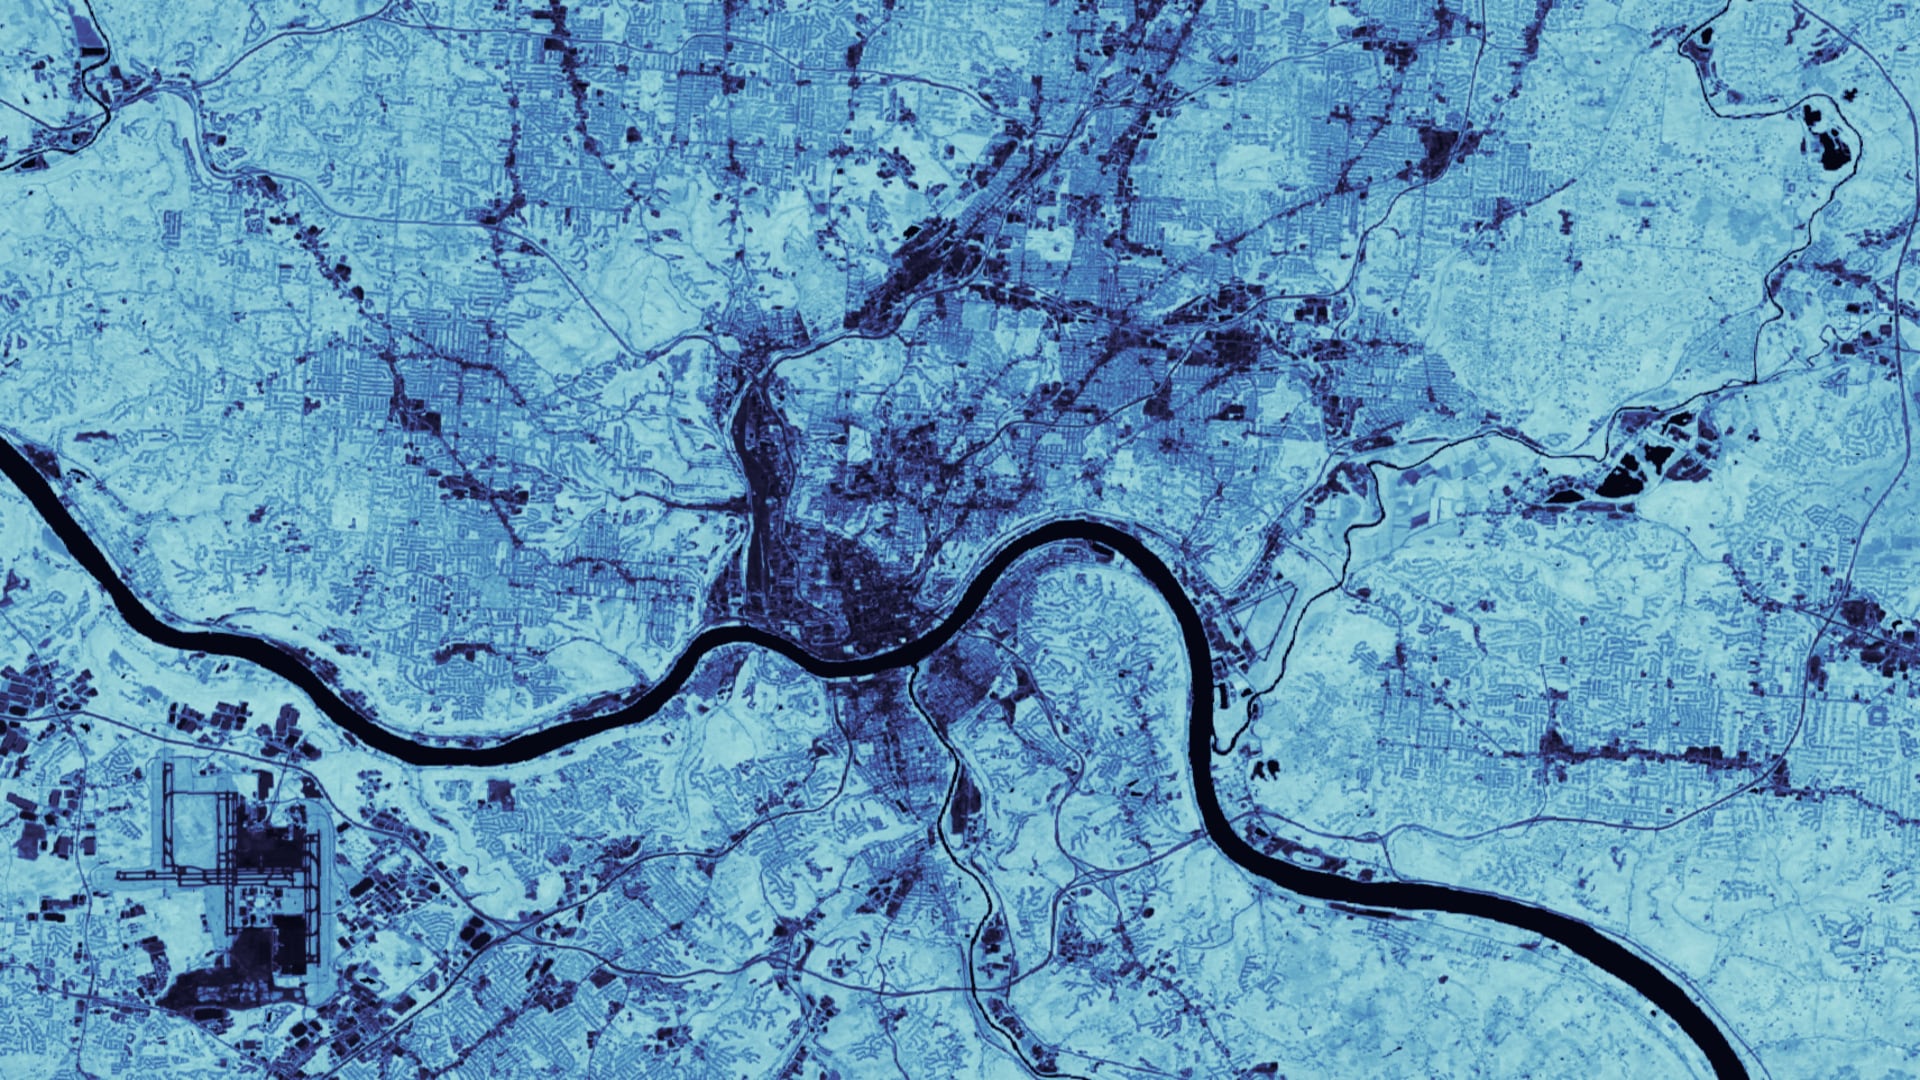 NDVI-processed imagery from 2020 Landsat 8 OLI data of the greater Cincinnati, OH and Covington, KY area. Lighter blues show denser vegetation while darker blues depict highly urbanized areas. The darkest blue line represents the extent of the Ohio River. Urban areas lacking slope-stabilizing and run-off retaining vegetation are more susceptible to landslides and flooding.Keywords: NDVI, landslide susceptibility, InVEST, urban flood mitigation